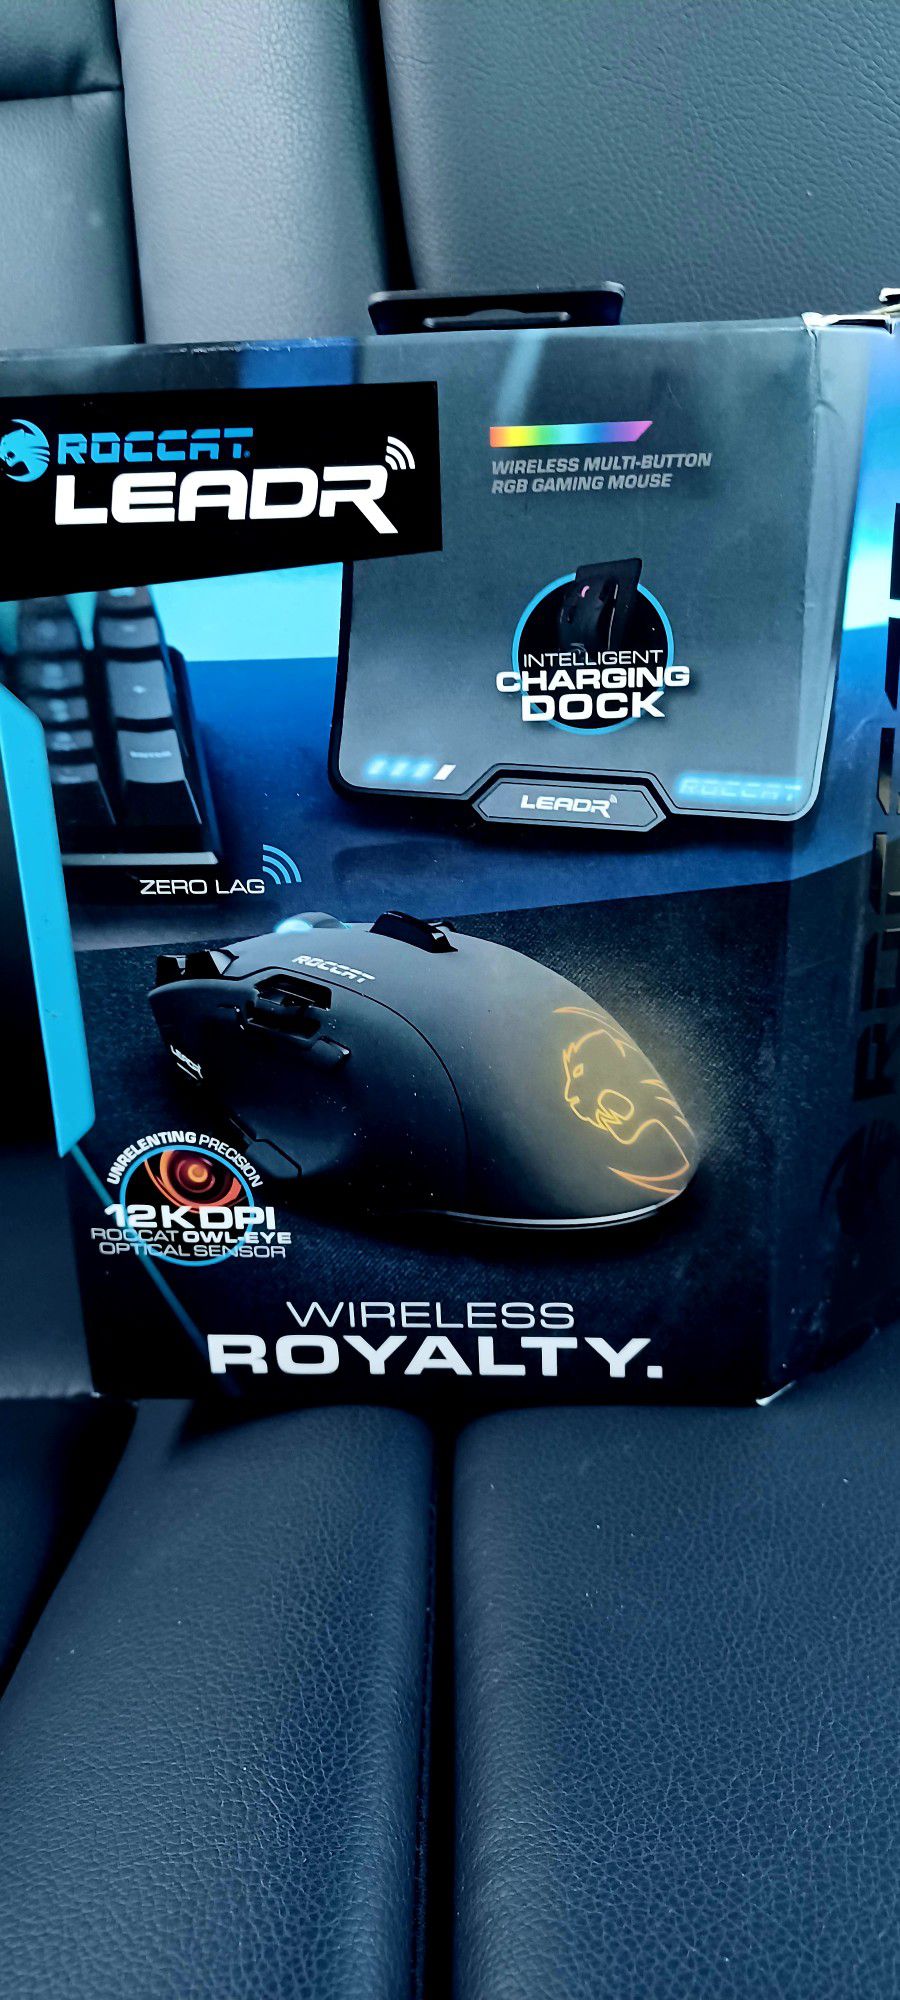 ROCCAT LEADR Gaming Mouse
